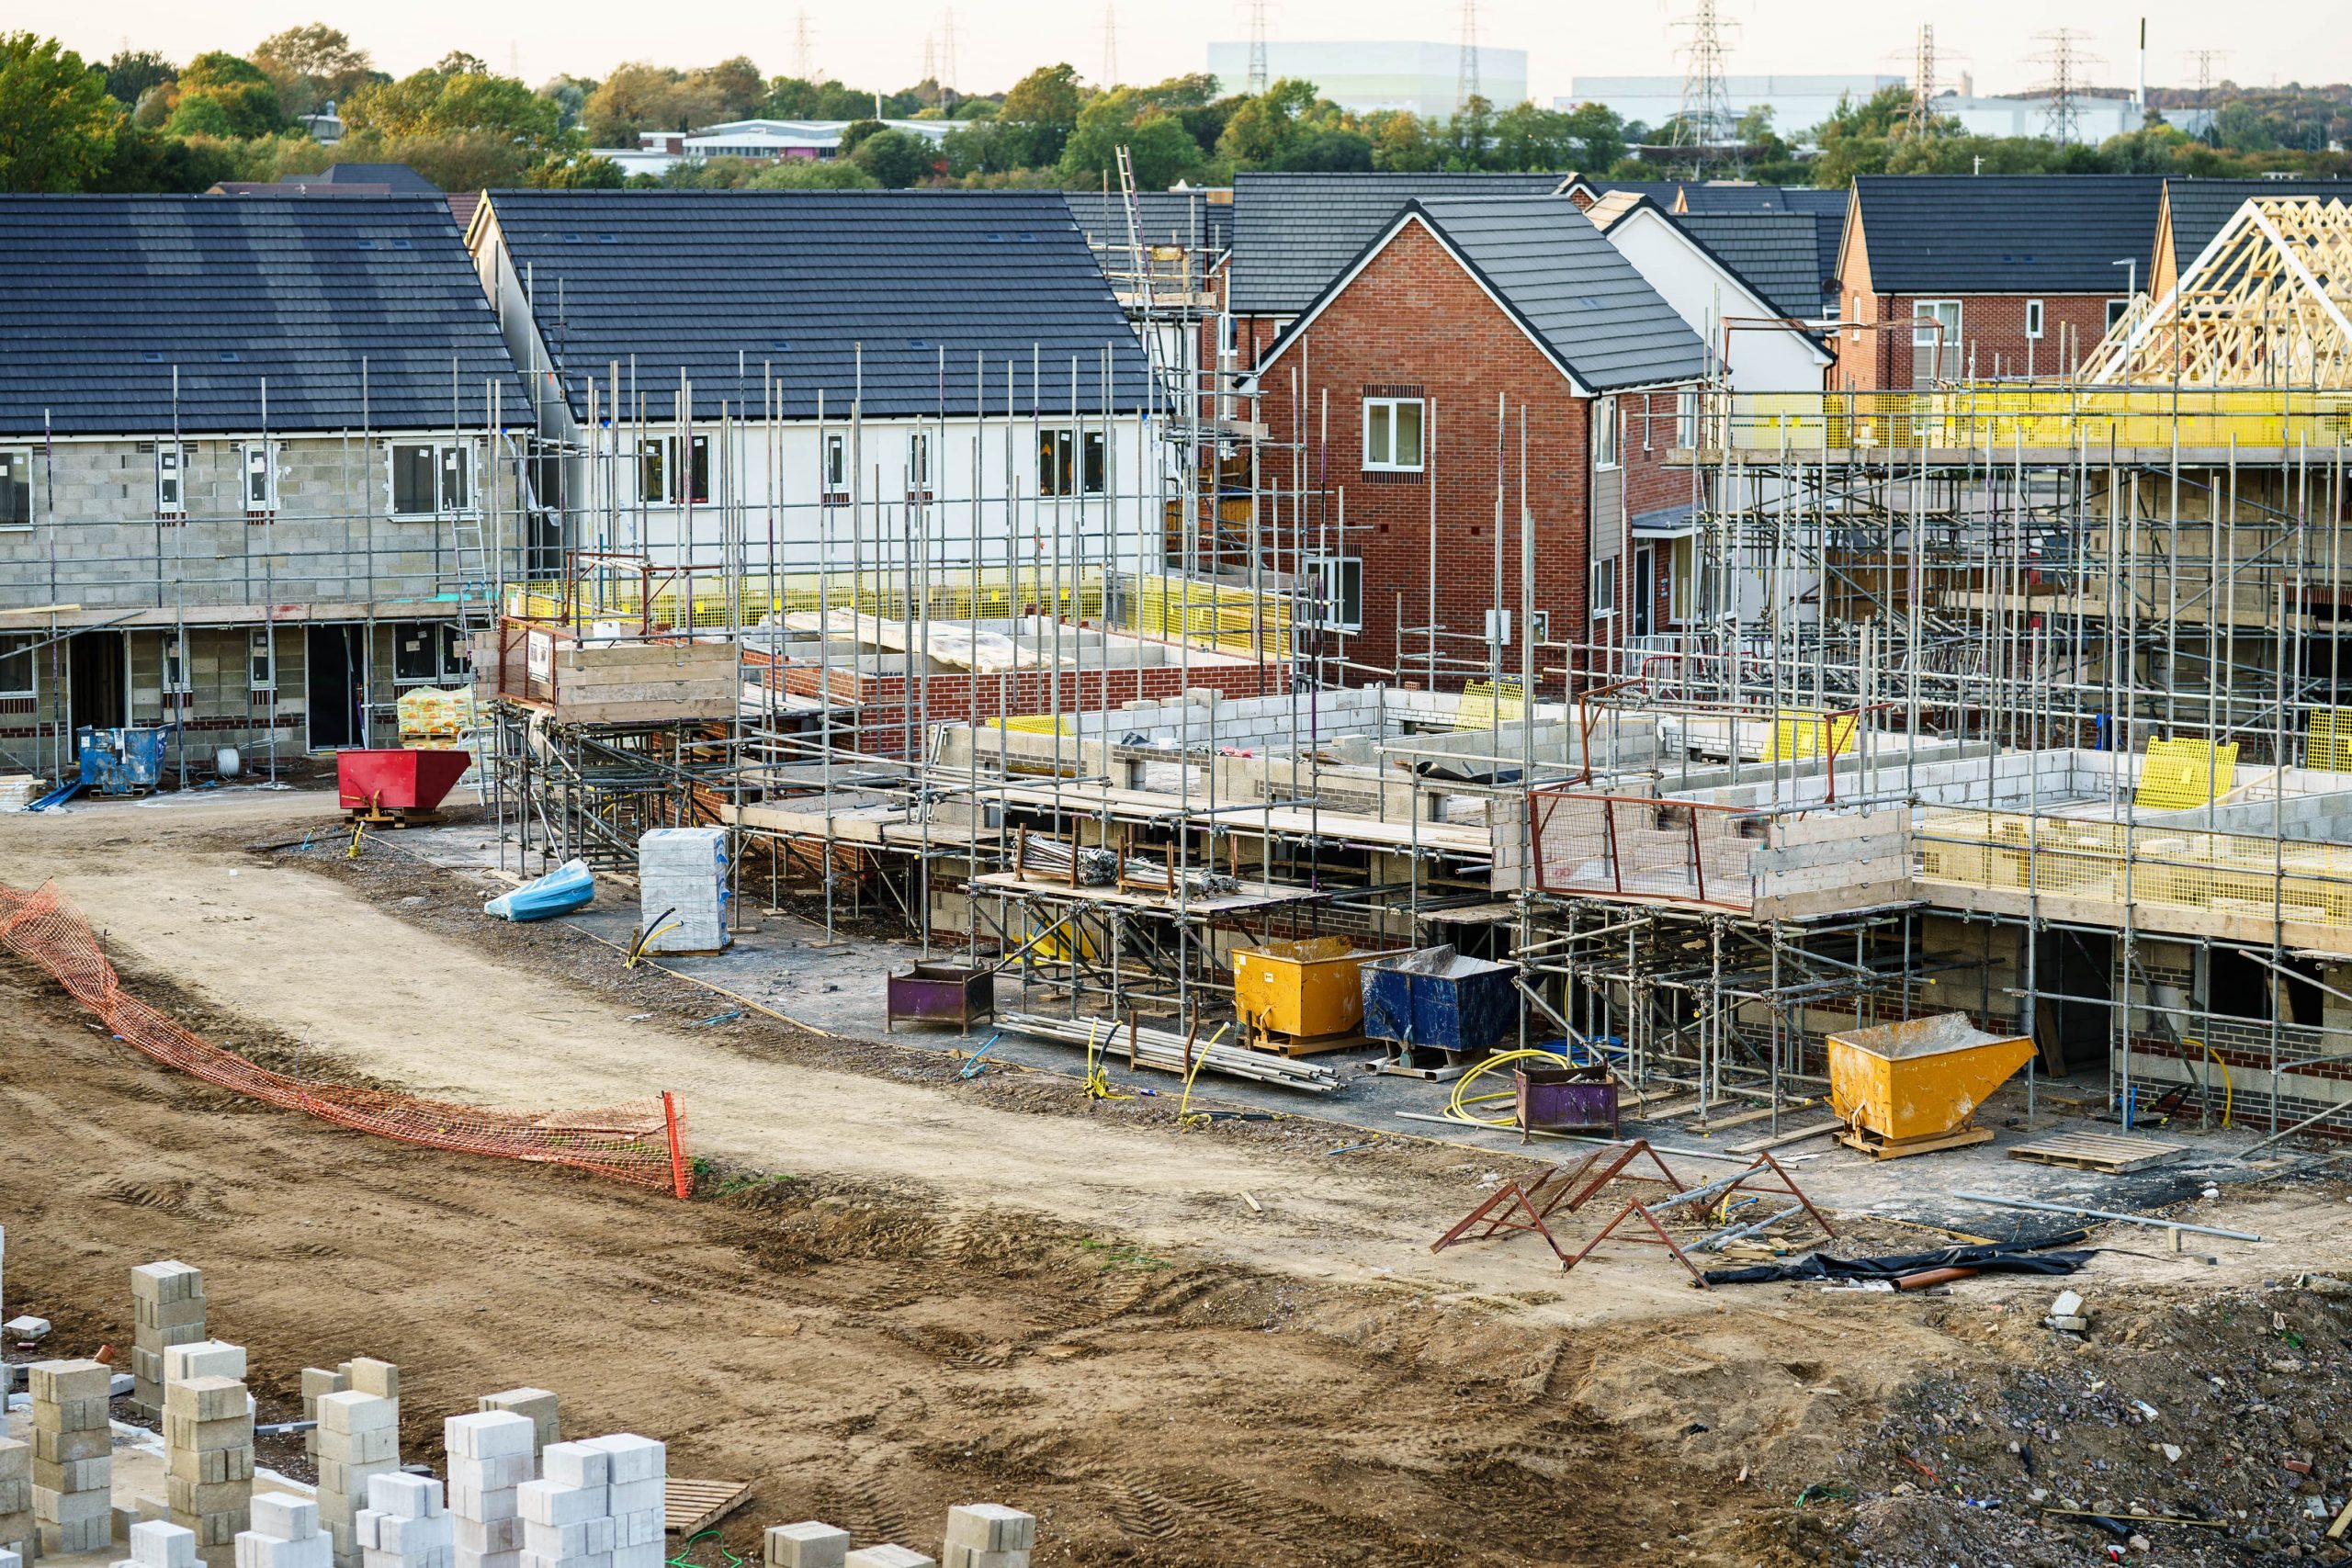 ShowEquip covers the Construction sector / industry. Image of building site with scaffolding around a part built house with externally completed buildings behind.